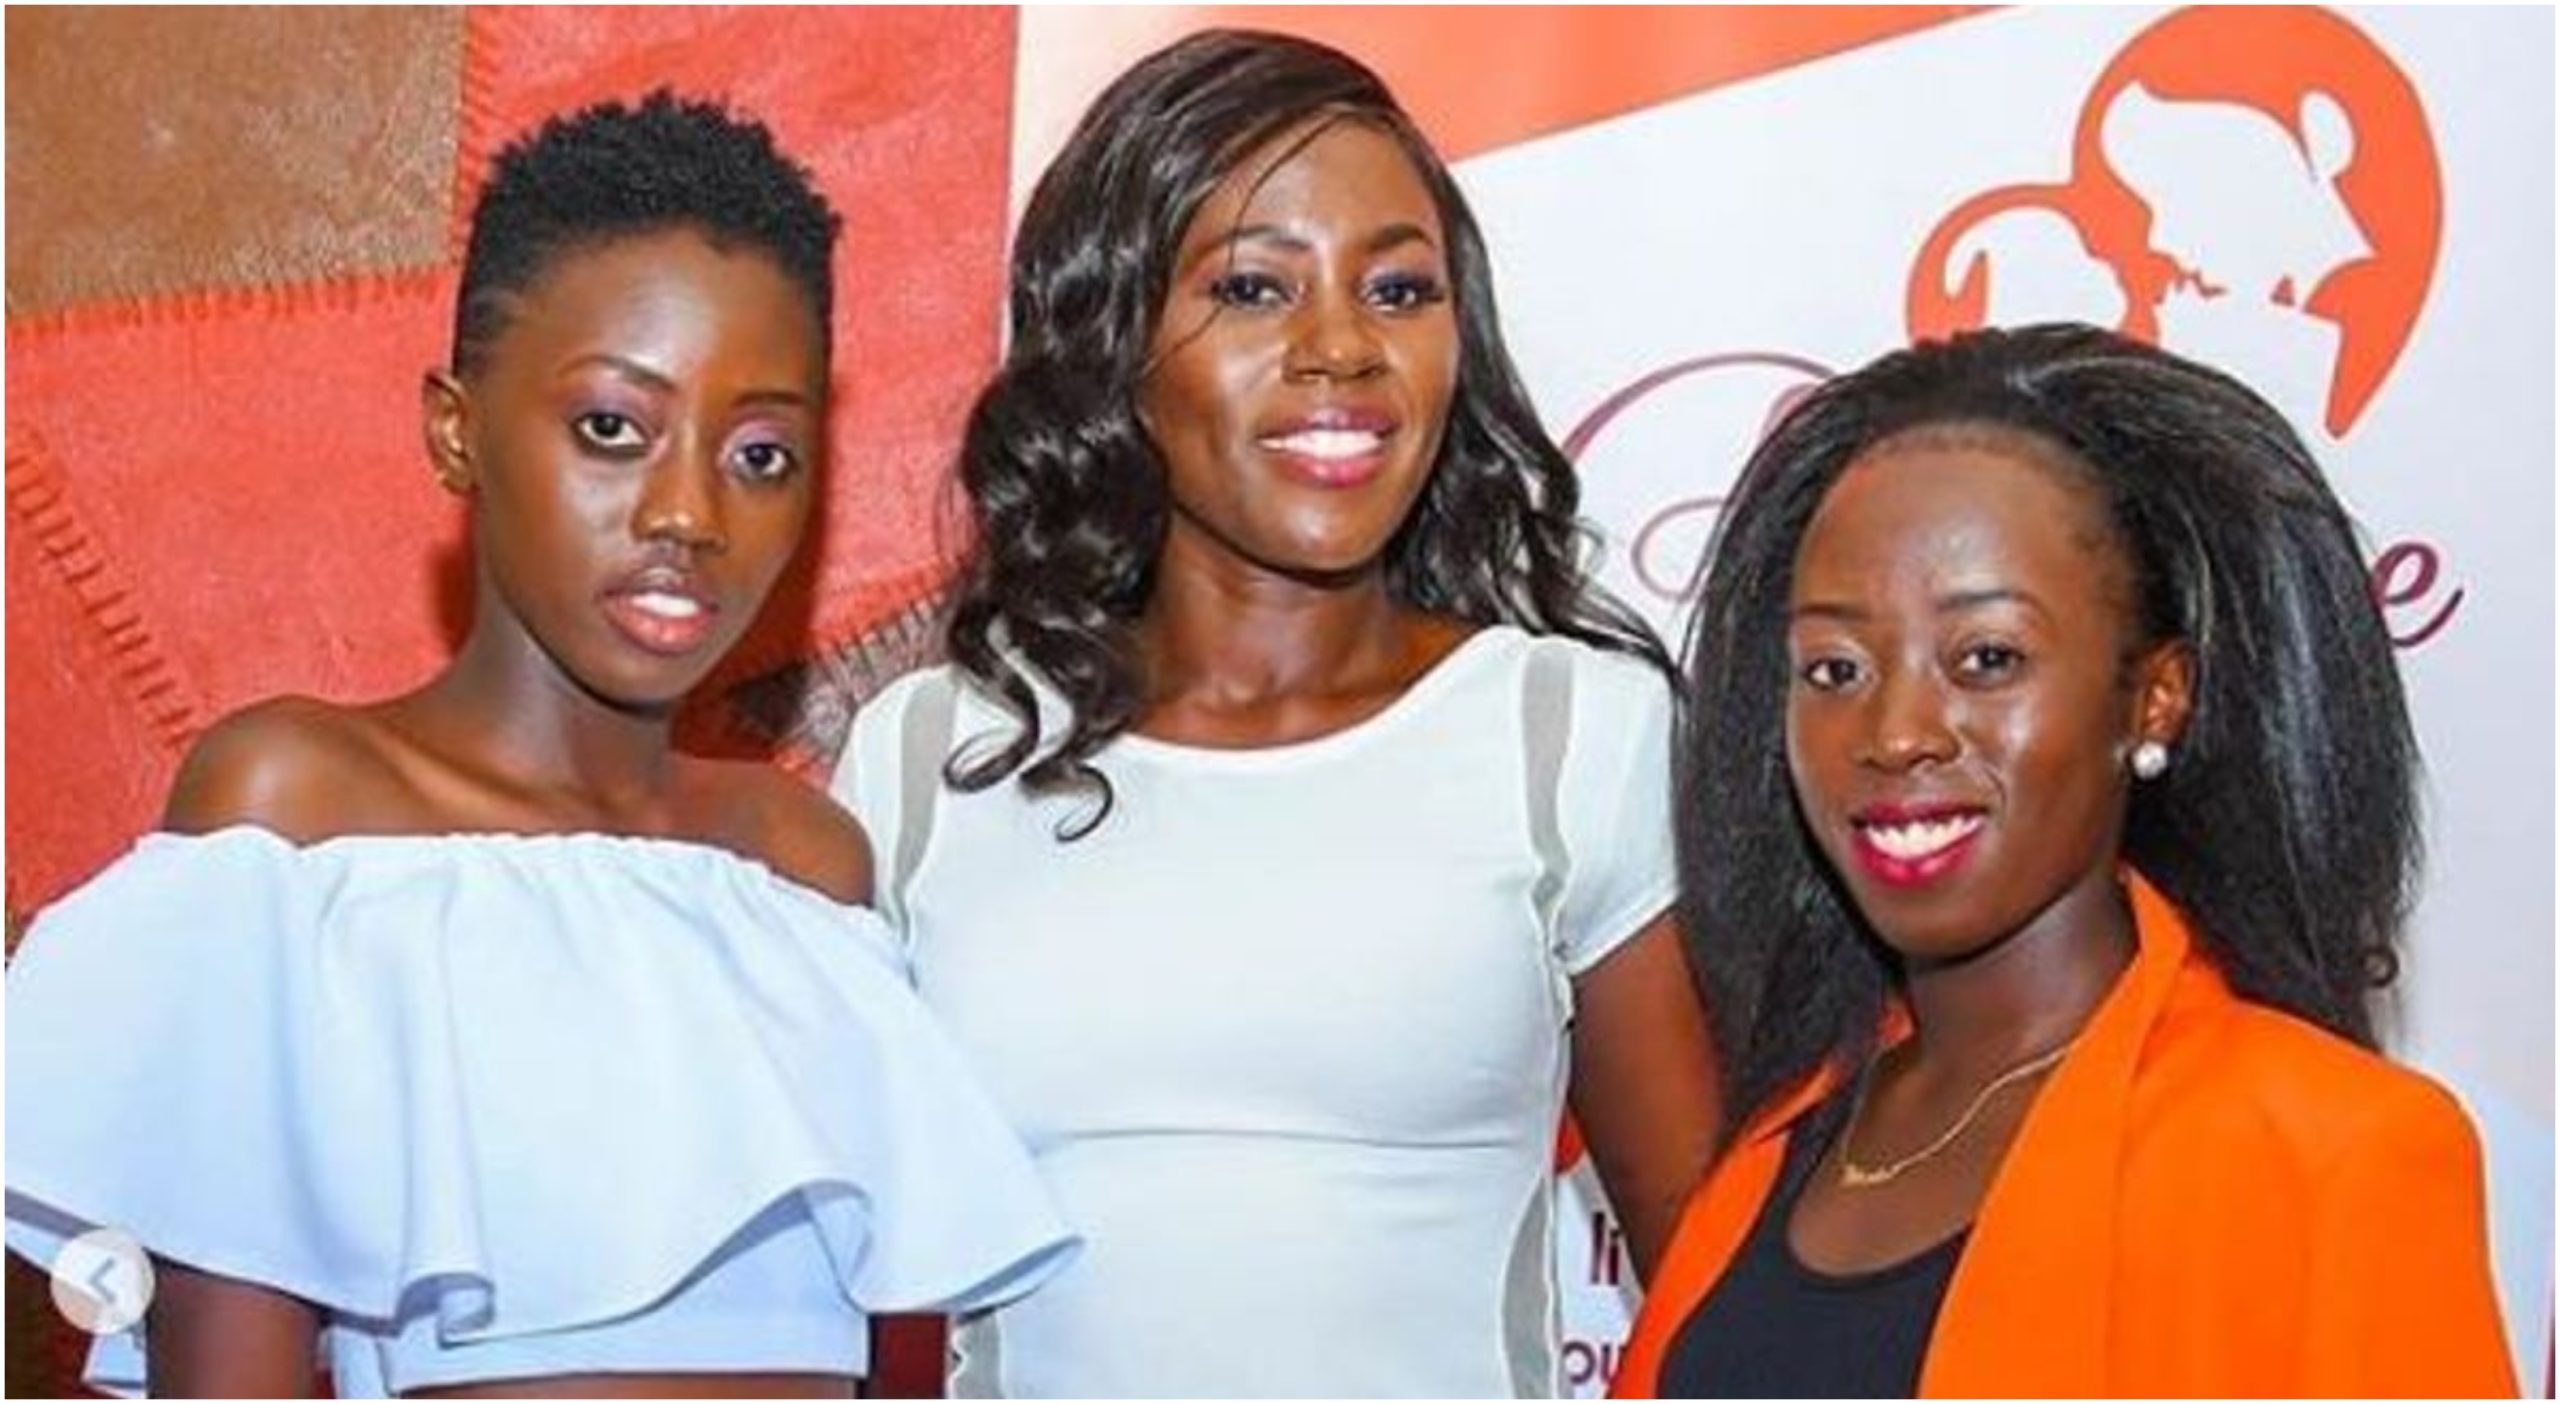 Aww! Akothee gives daughter blessings as she goes into marriage (Photos)